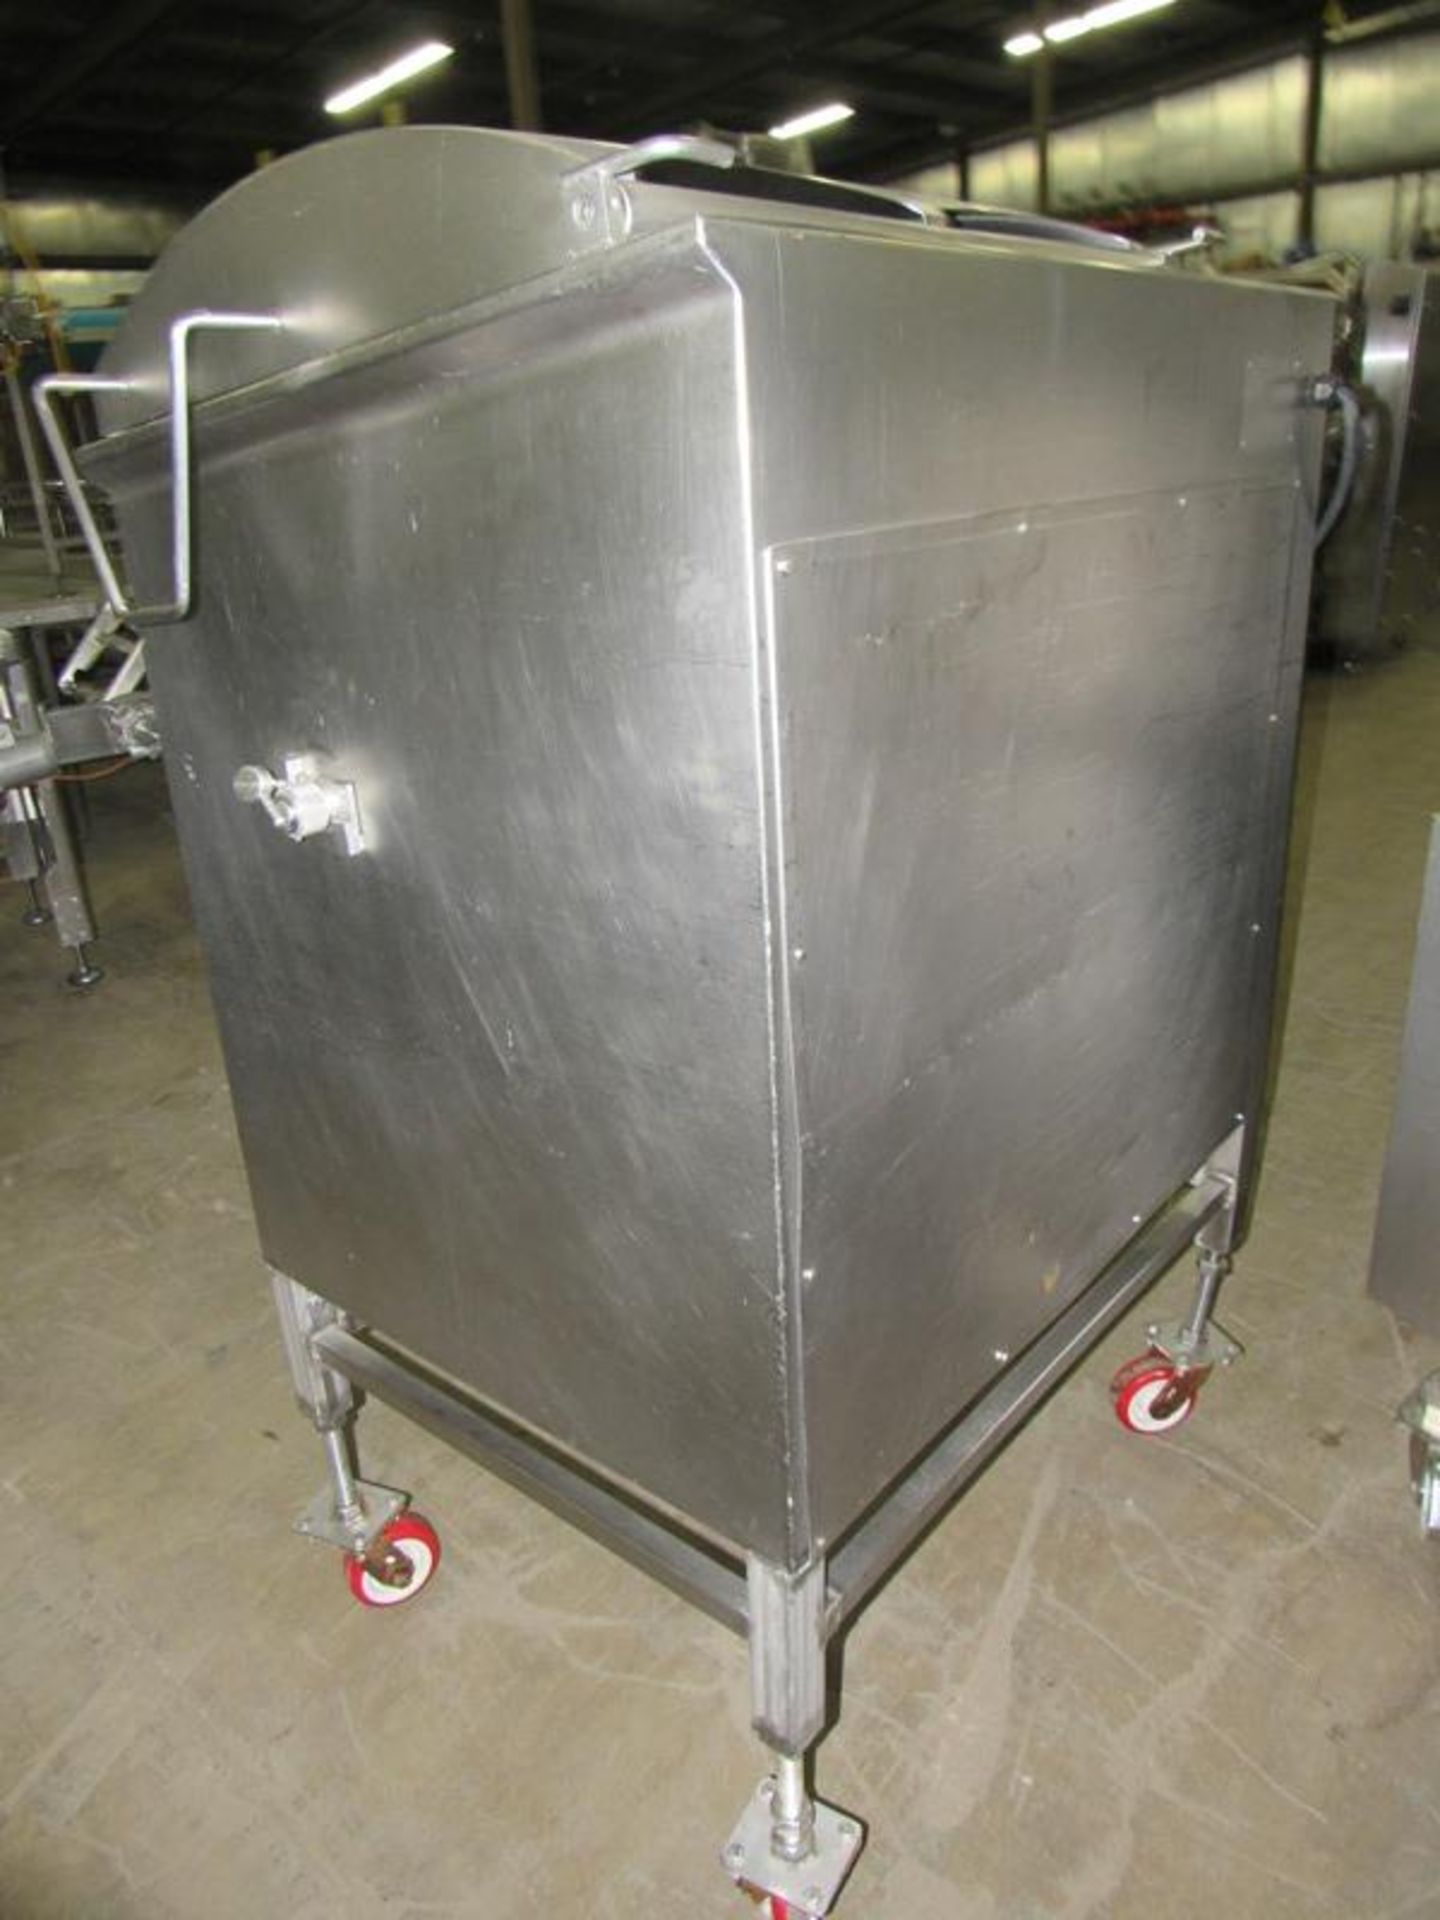 Hollymatic Stainless Steel Mixer/Grinder, 20" W X 29" L X 22" D hopper, 5" Dia. barrel, on wheels " - Image 3 of 6